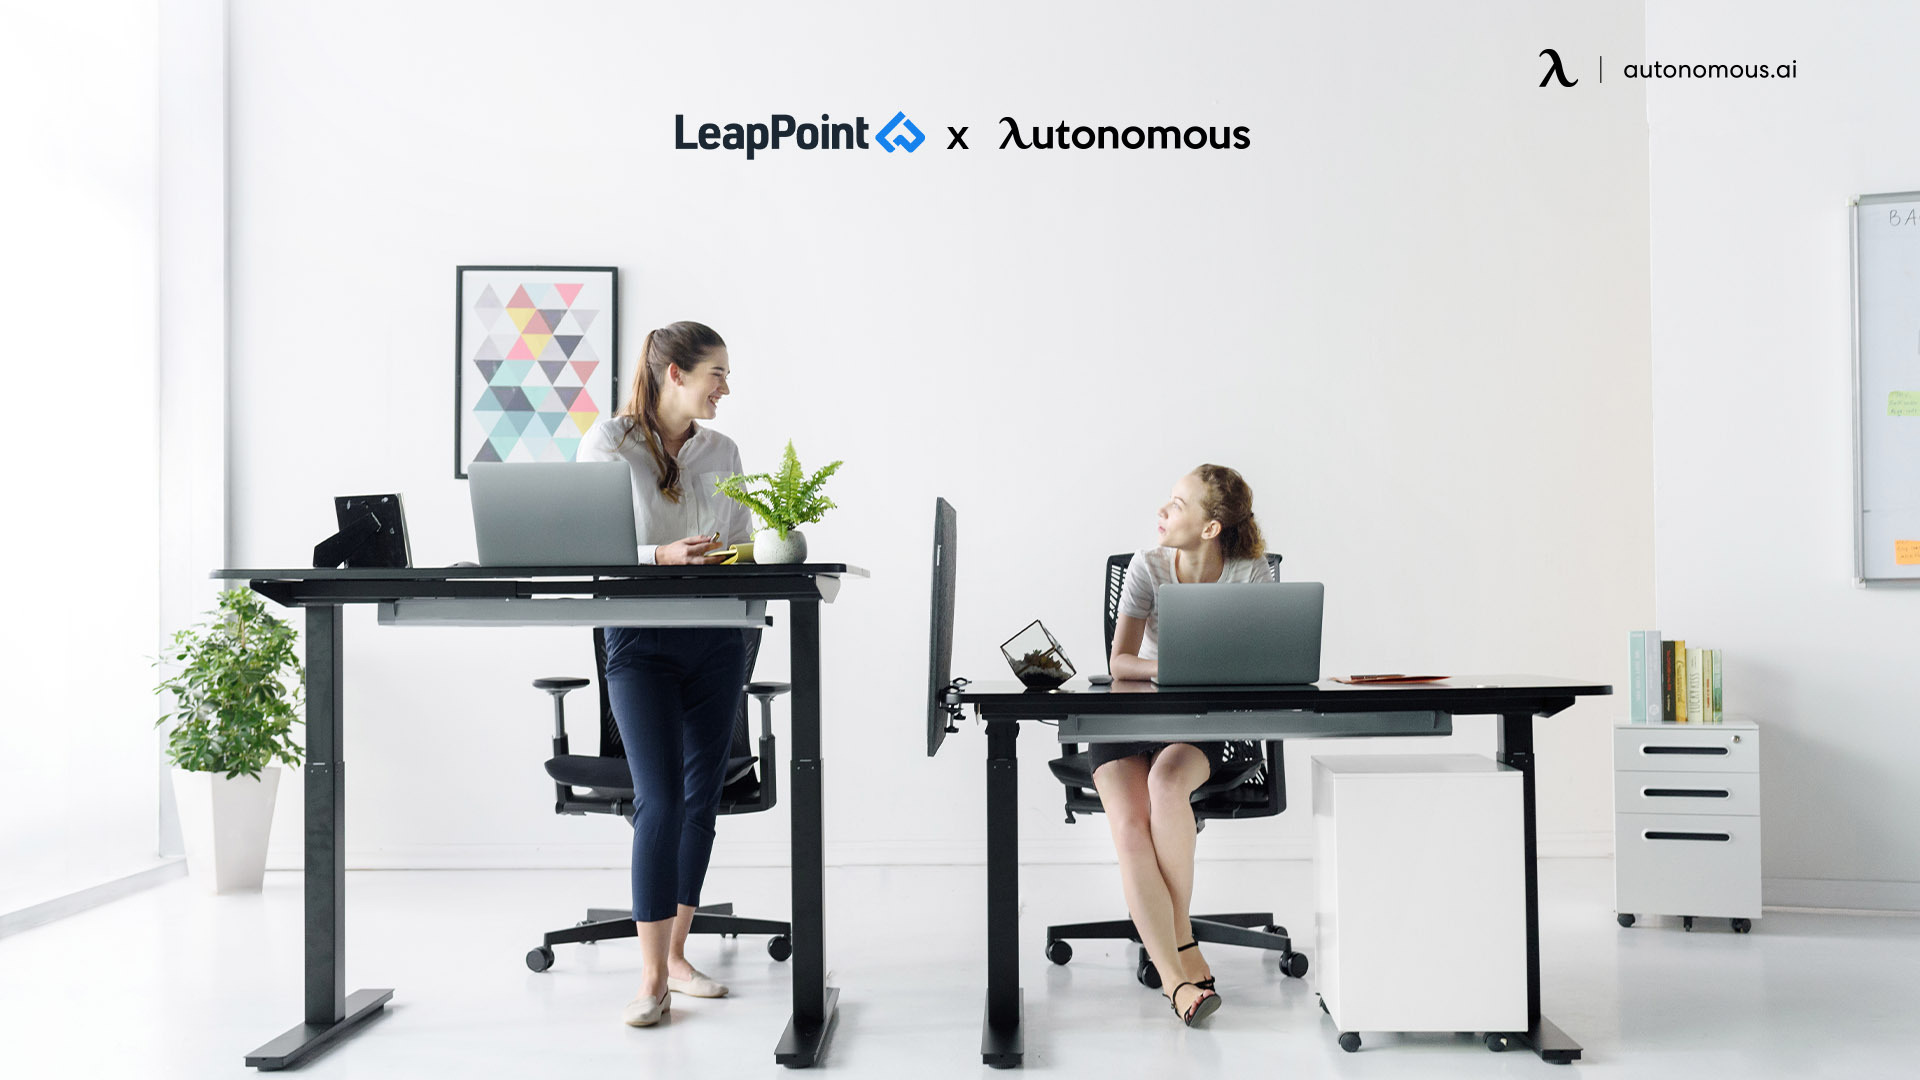 LeapPoint x Autonomous: A Partnership to Improve Everyday Work